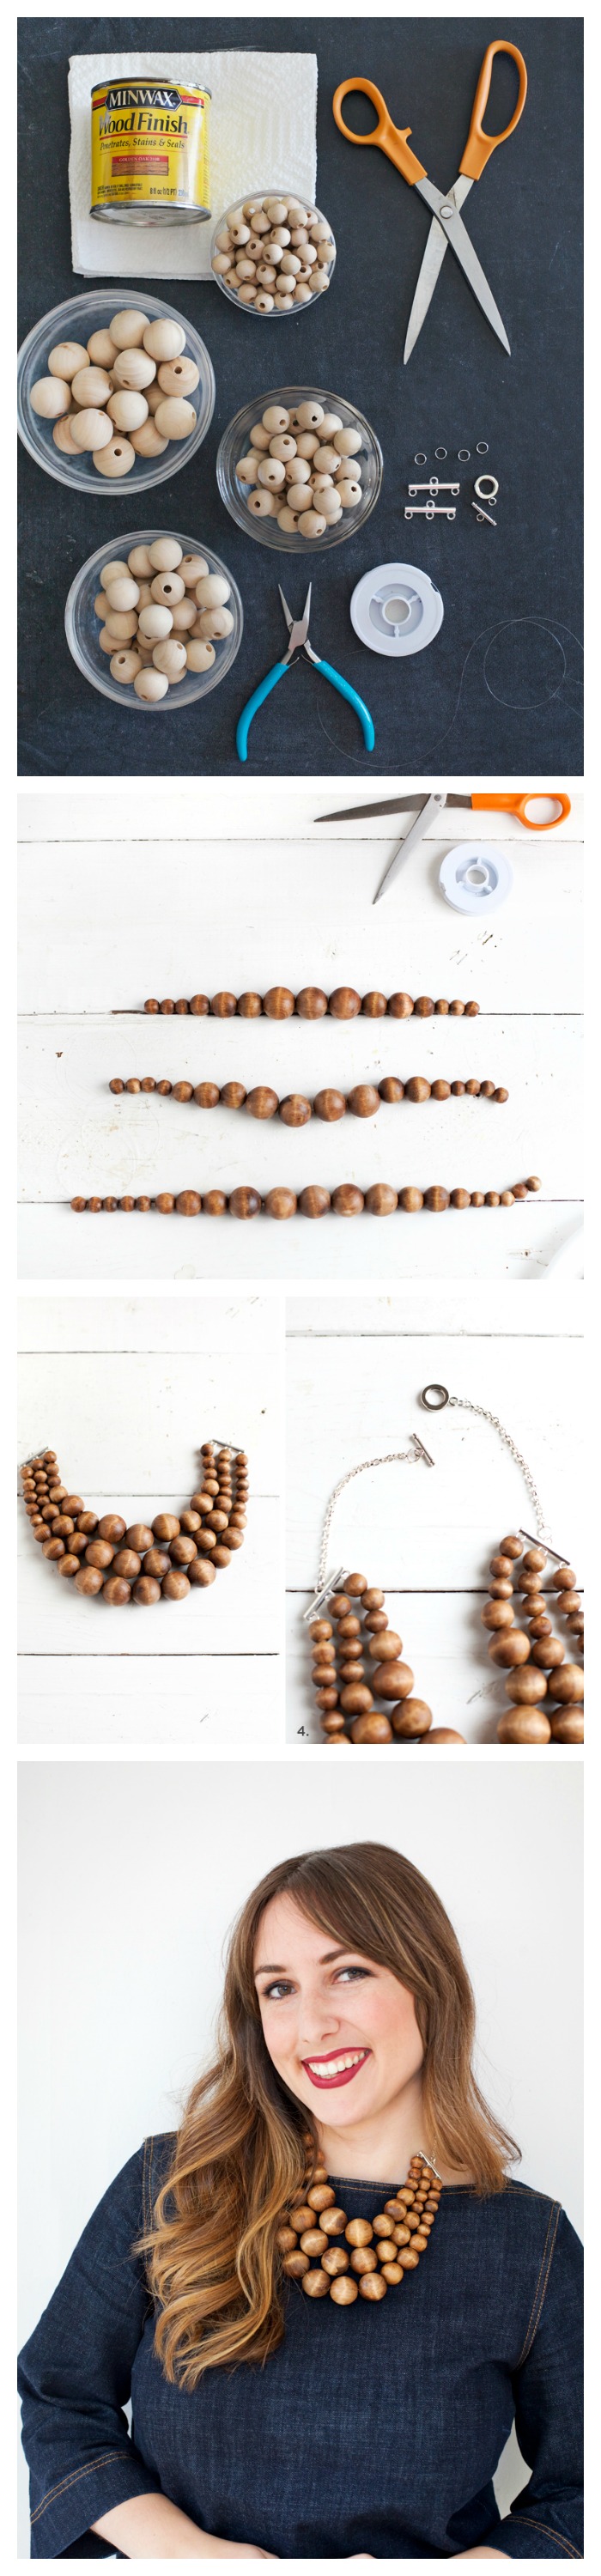 17 Outstanding DIY Necklaces You Must See